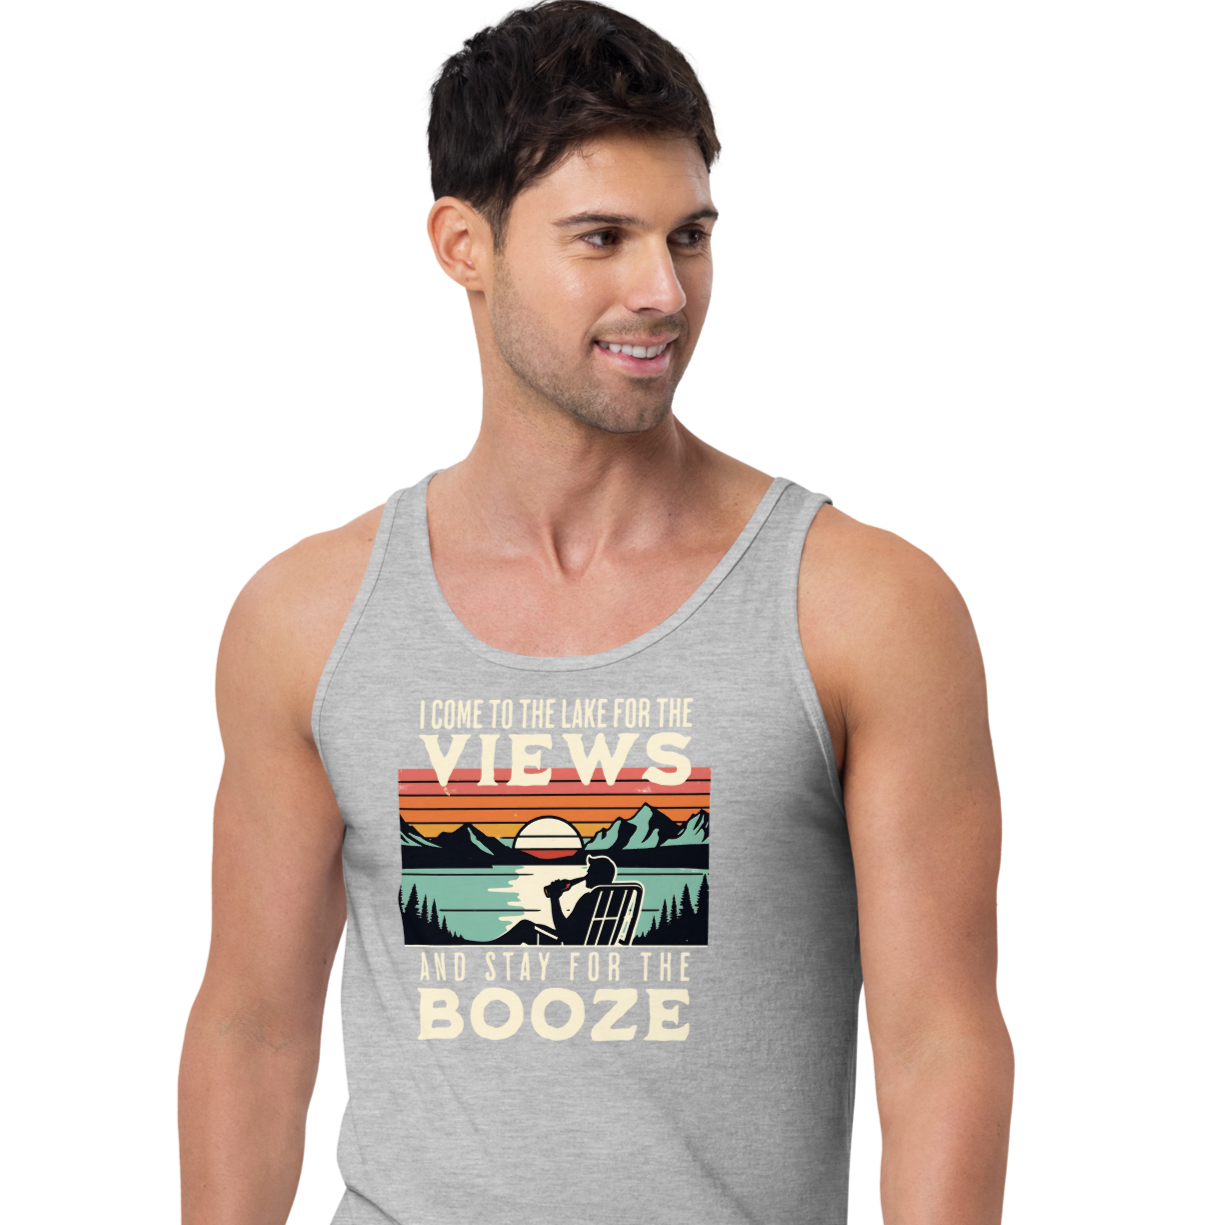 Men's tank top with "I Come to the Lake for the Views and Stay for the Booze," showing a man in a beach chair, lake, and sunset.